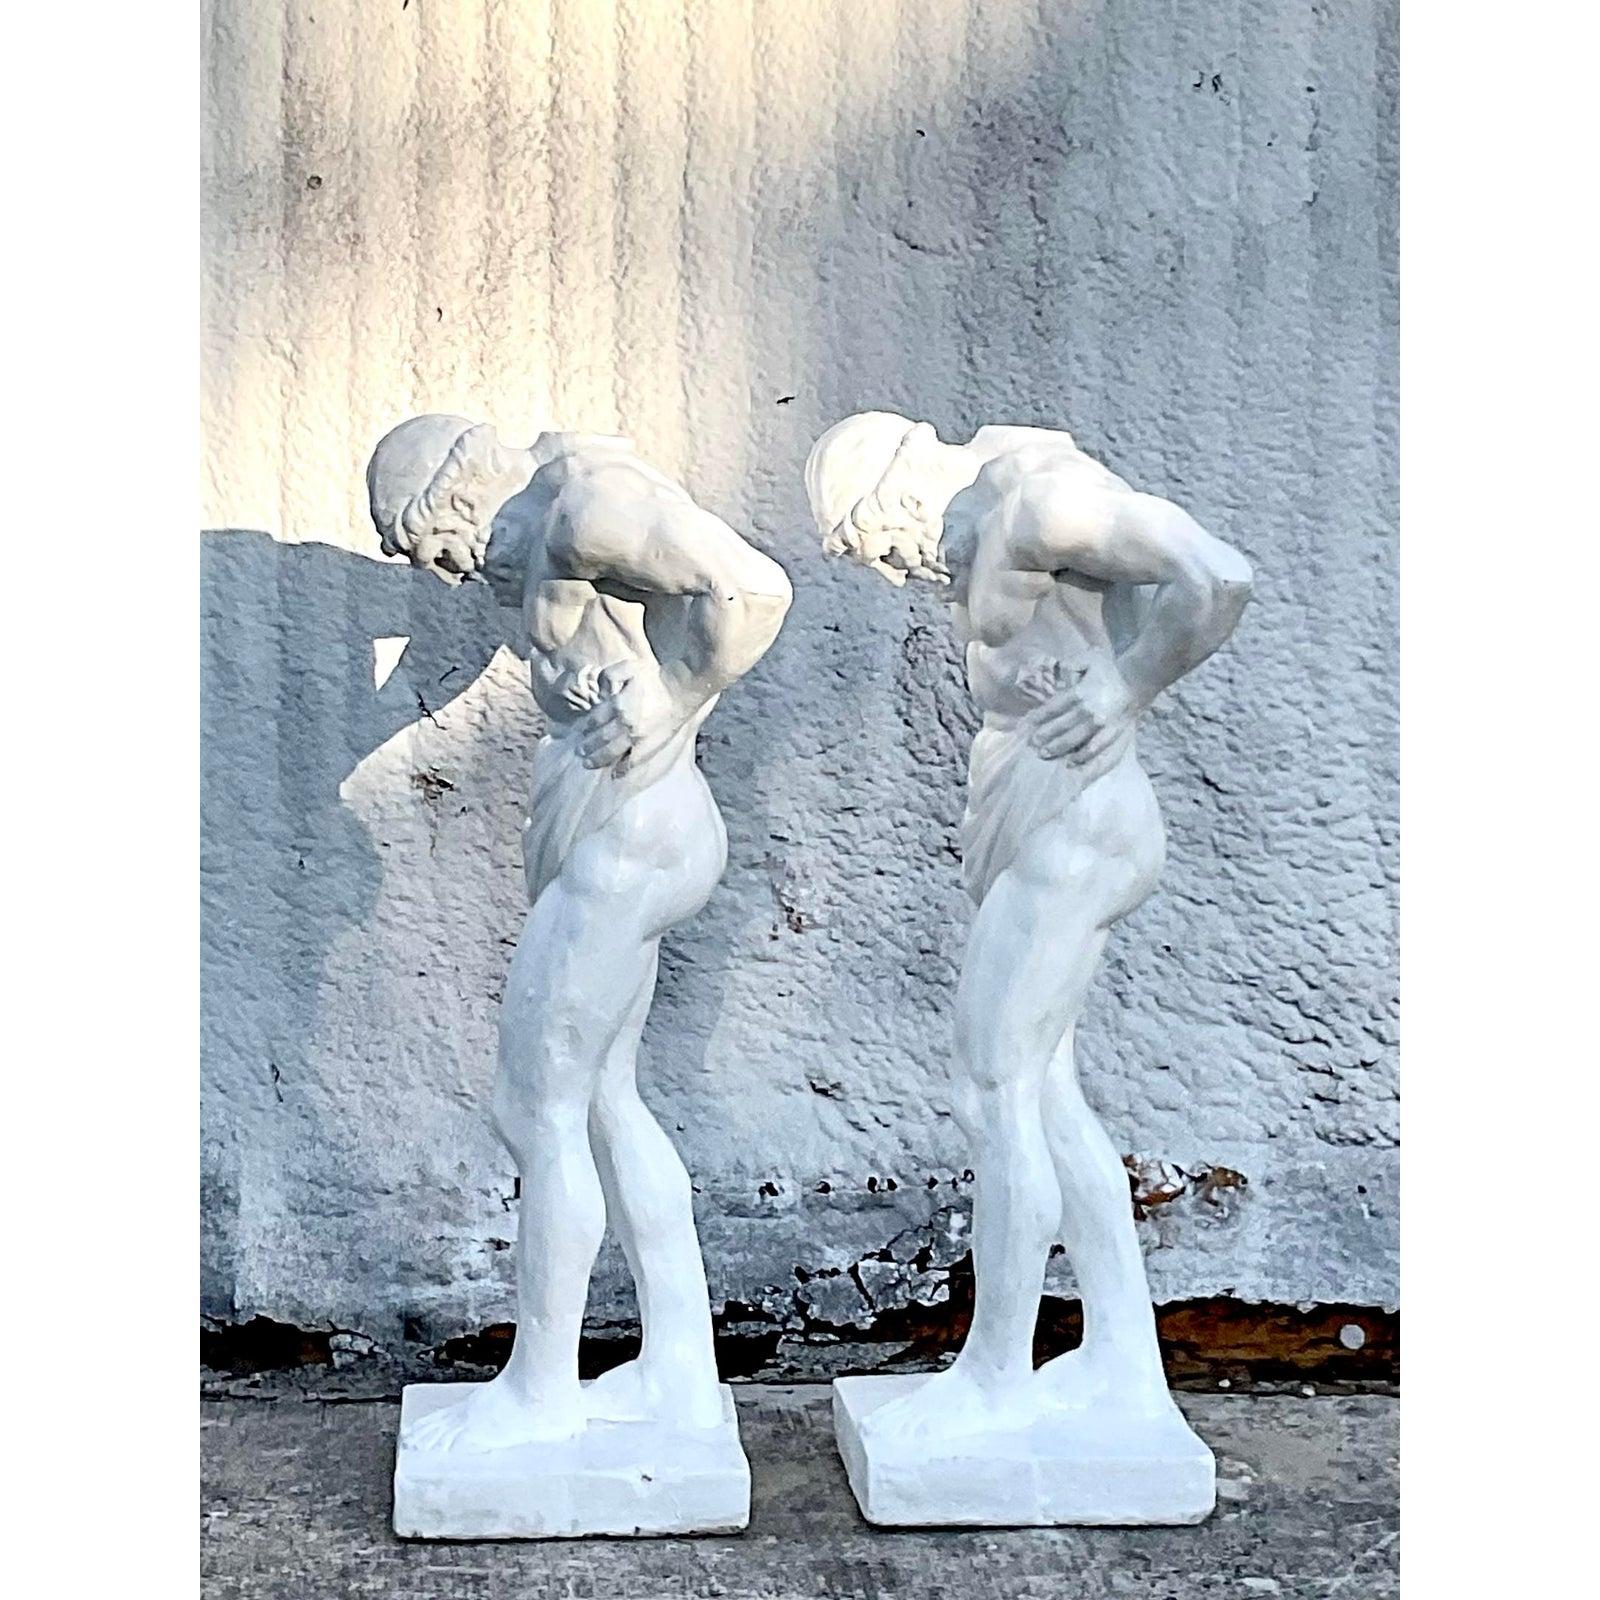 Fantastic pair of vintage concrete Hercules statues. They are great alone or add a stone top for the chicest garden console ever. Acquired from a Palm Beach estate.